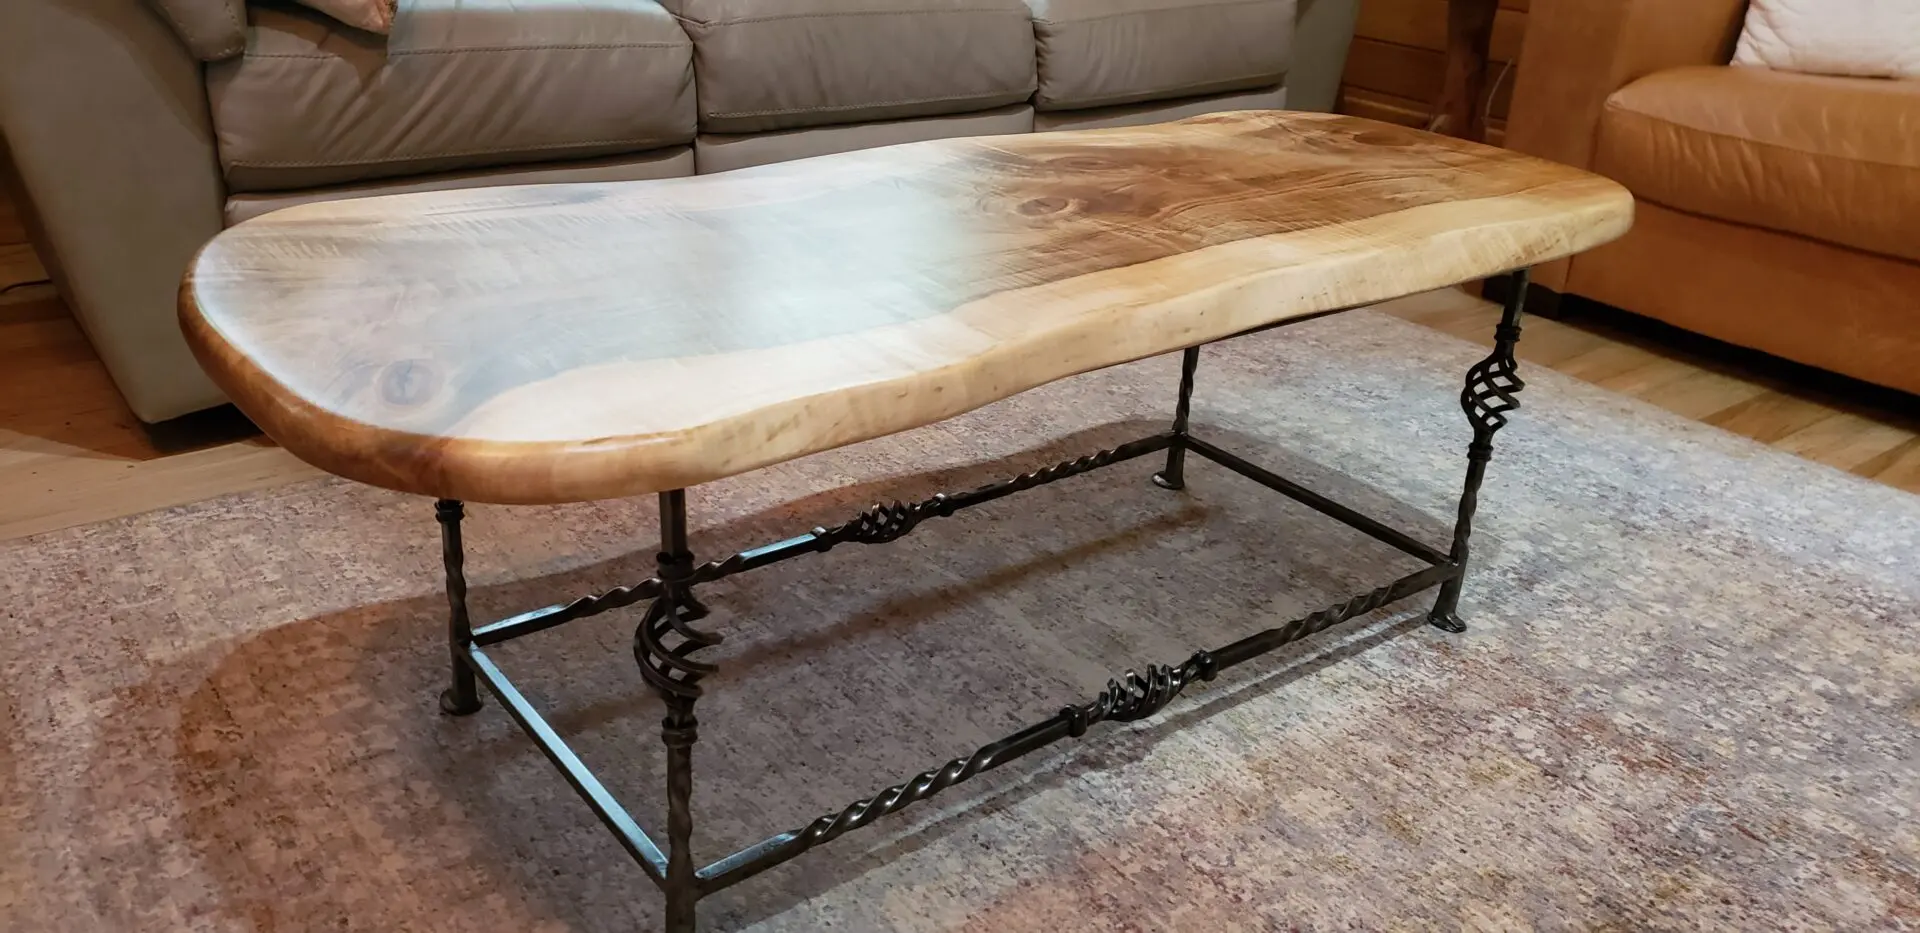 Curly Silver Maple Coffee Table $1200.00